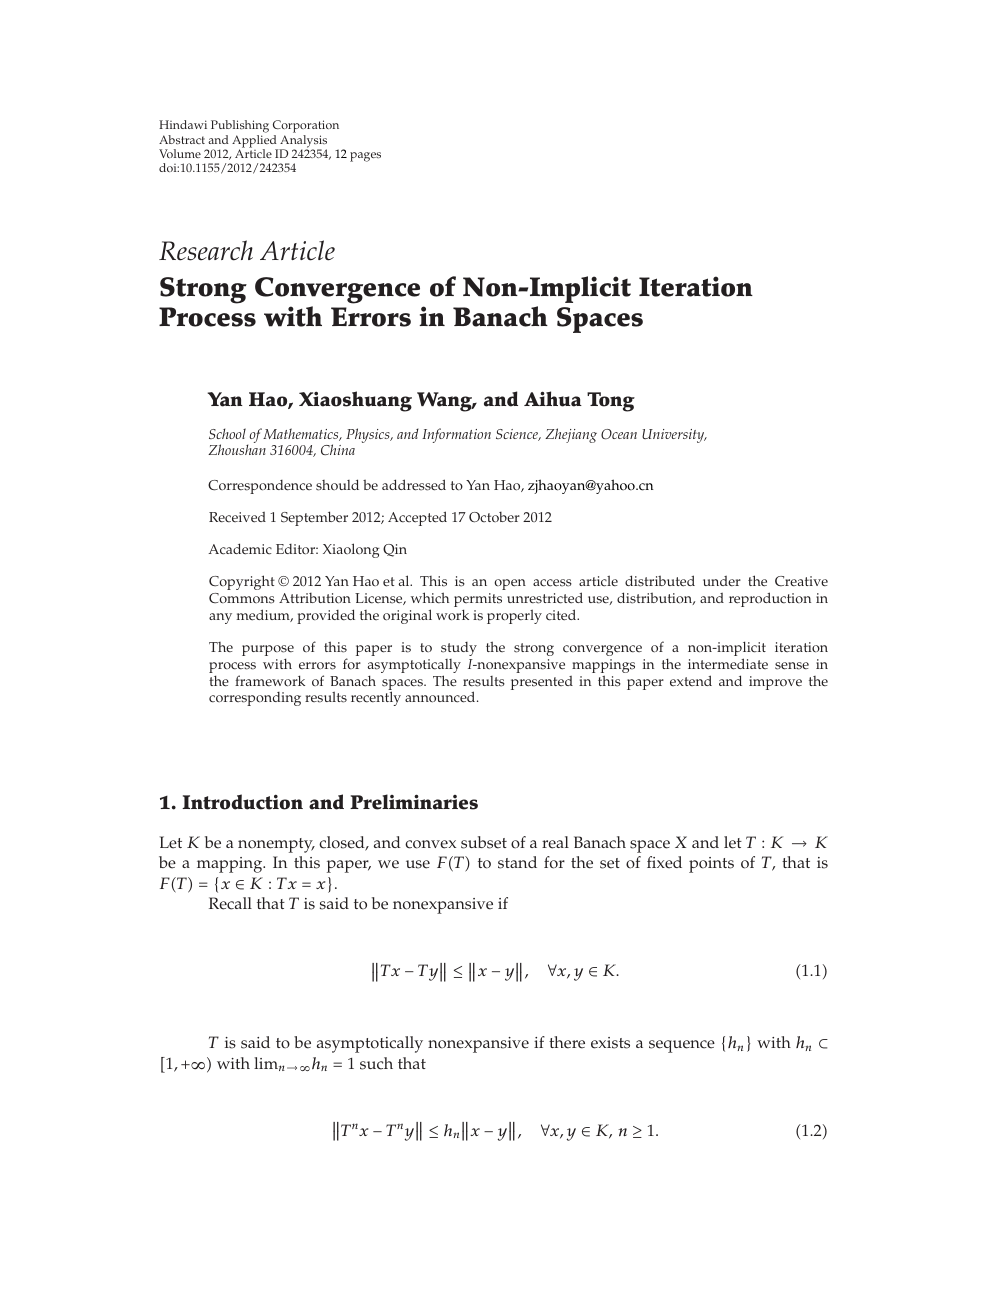 Strong Convergence Of Non Implicit Iteration Process With Errors In Banach Spaces Topic Of Research Paper In Mathematics Download Scholarly Article Pdf And Read For Free On Cyberleninka Open Science Hub